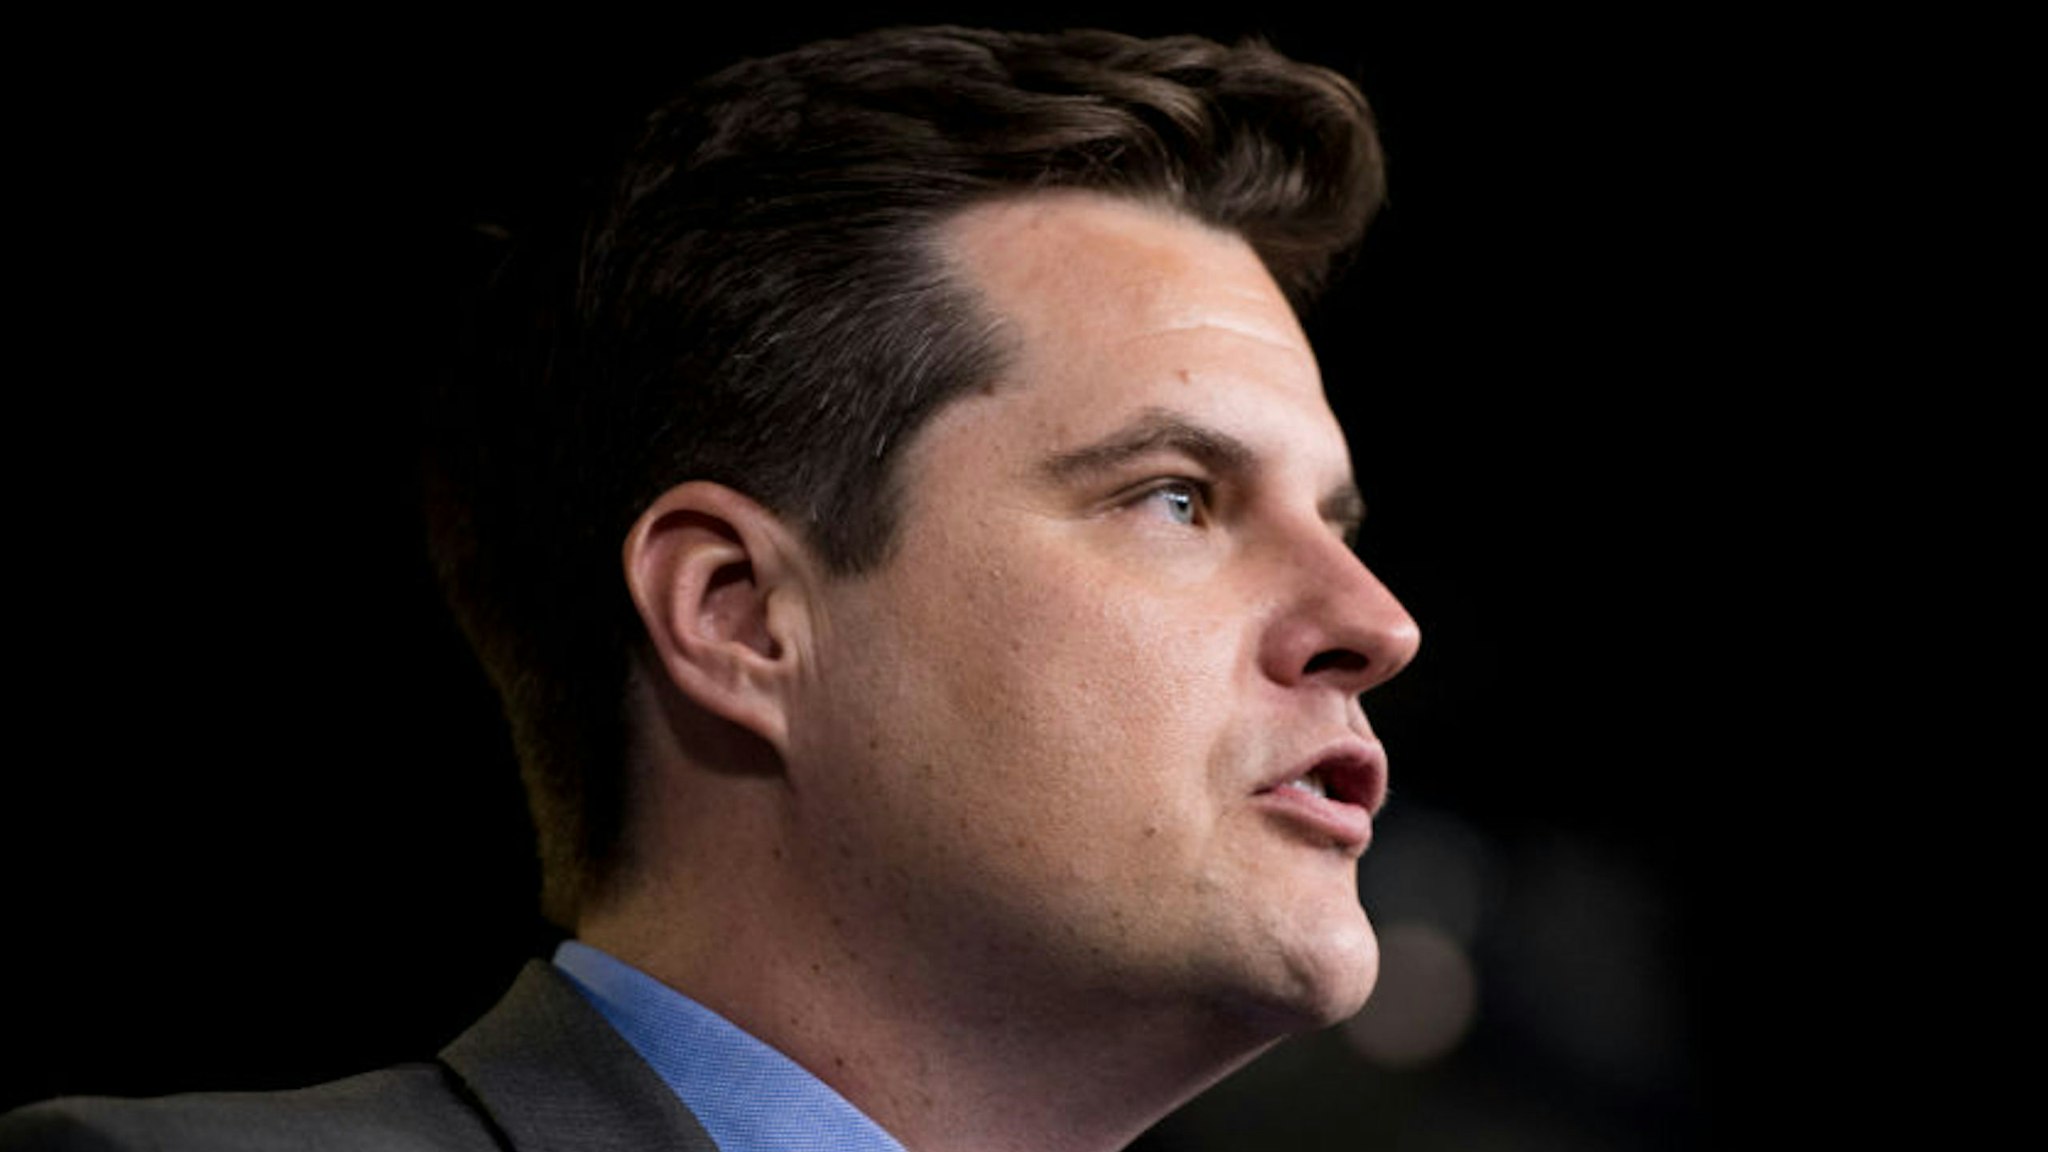 UNITED STATES - SEPTEMBER 6: Rep. Matt Gaetz, R-Fla., participates in the press conference calling on President Trump to declassify the Carter Page FISA applications on Thursday, Sept. 6, 2018.